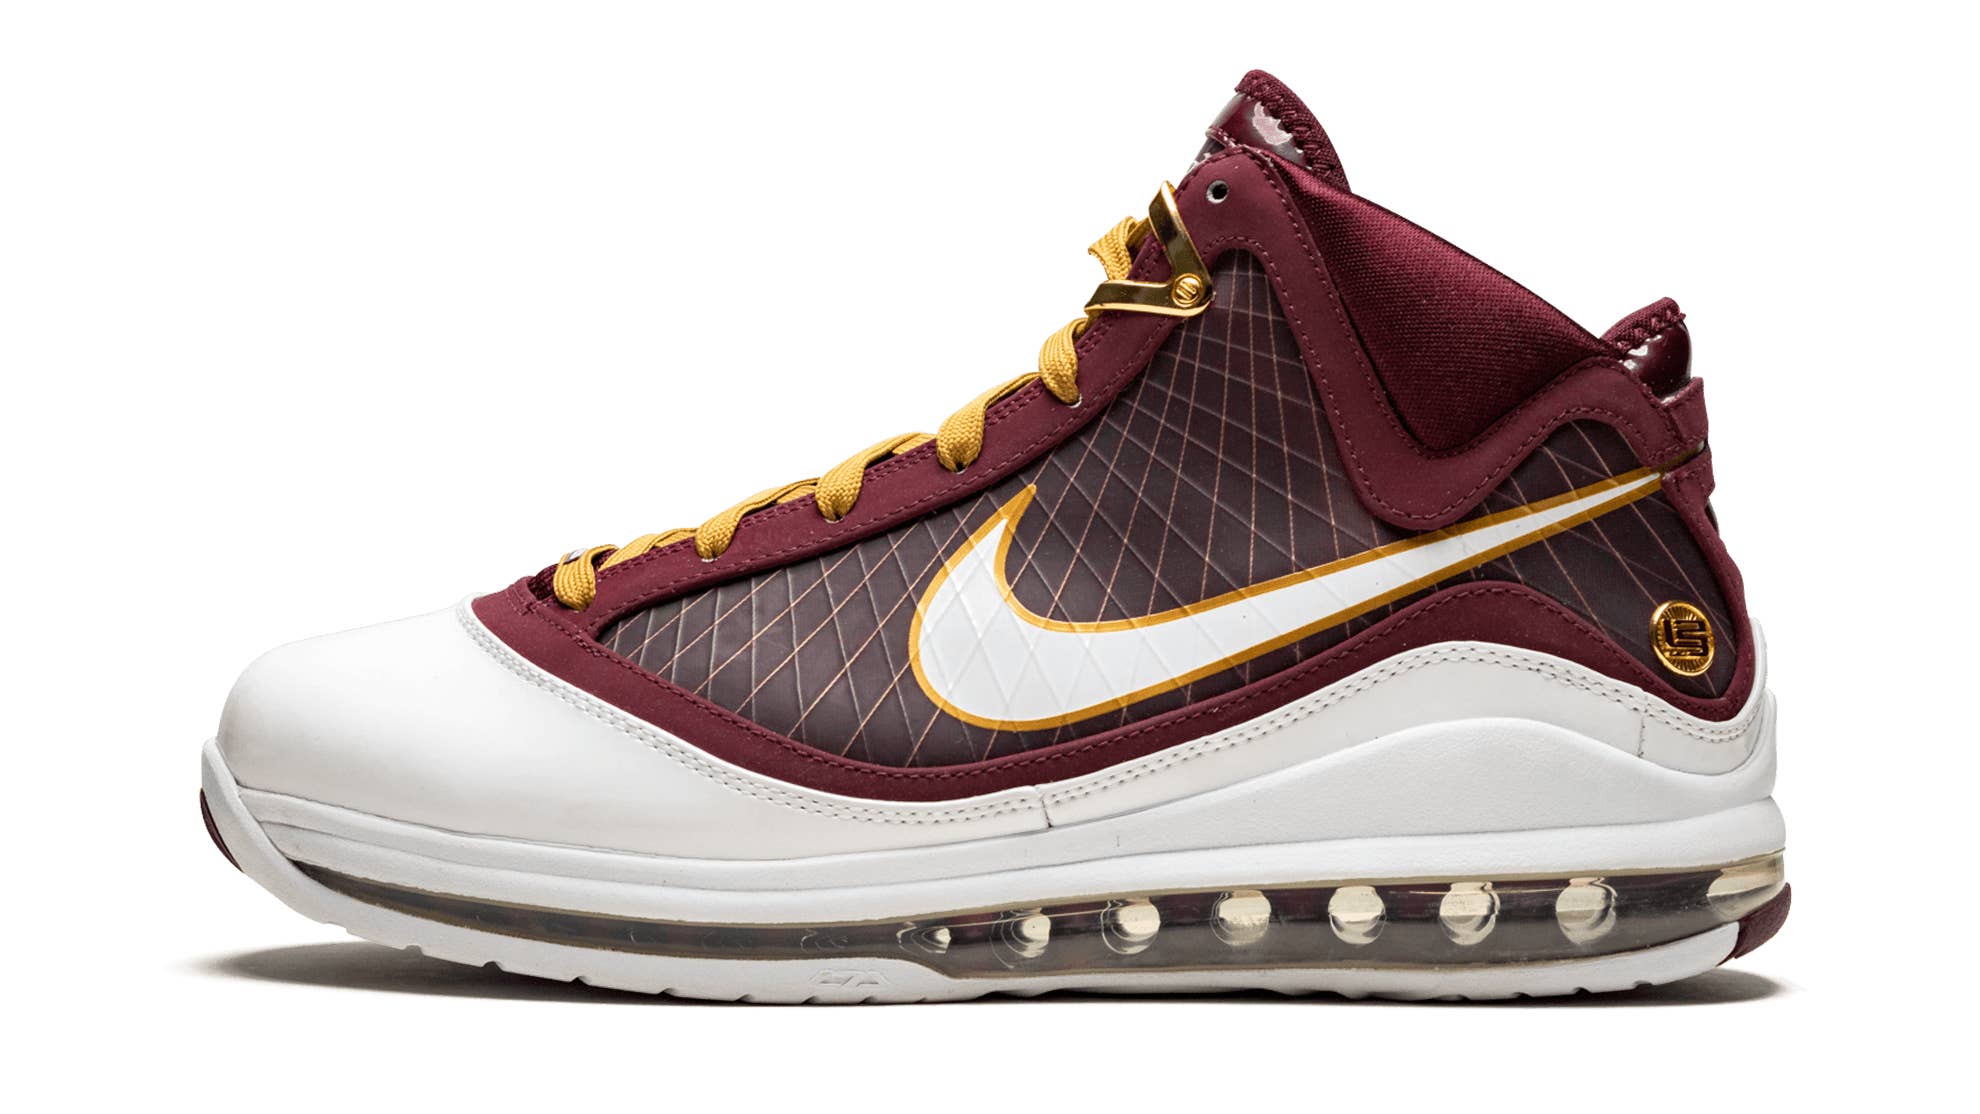 Nike LeBron 7 'Christ the King' 2010 Lateral